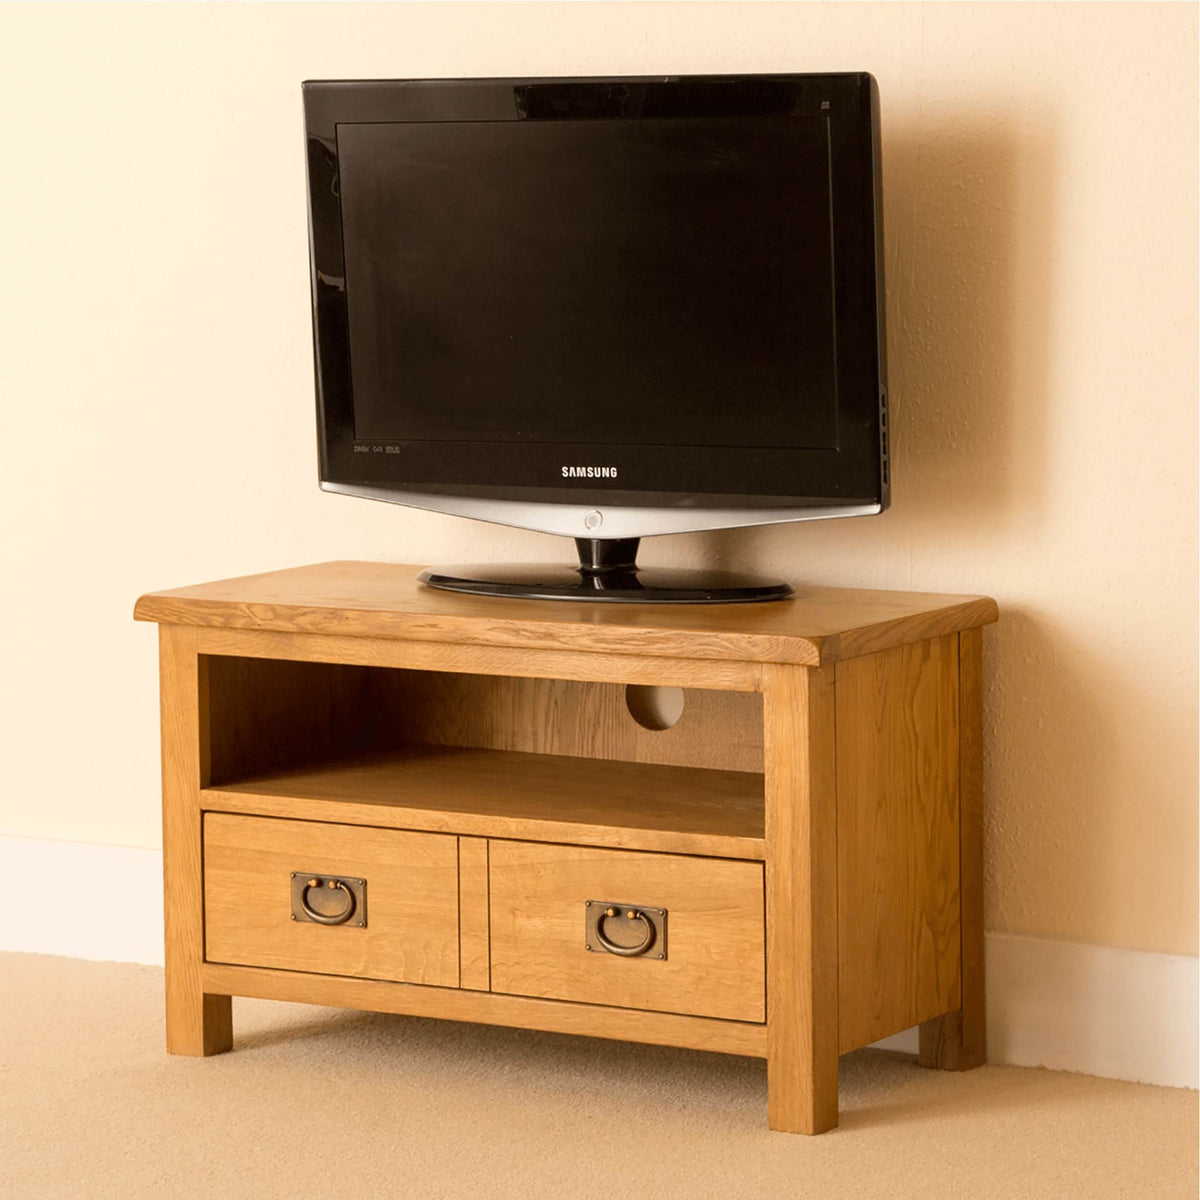 Lanner Waxed Oak Small TV Stand with Drawer, Unit for Screens